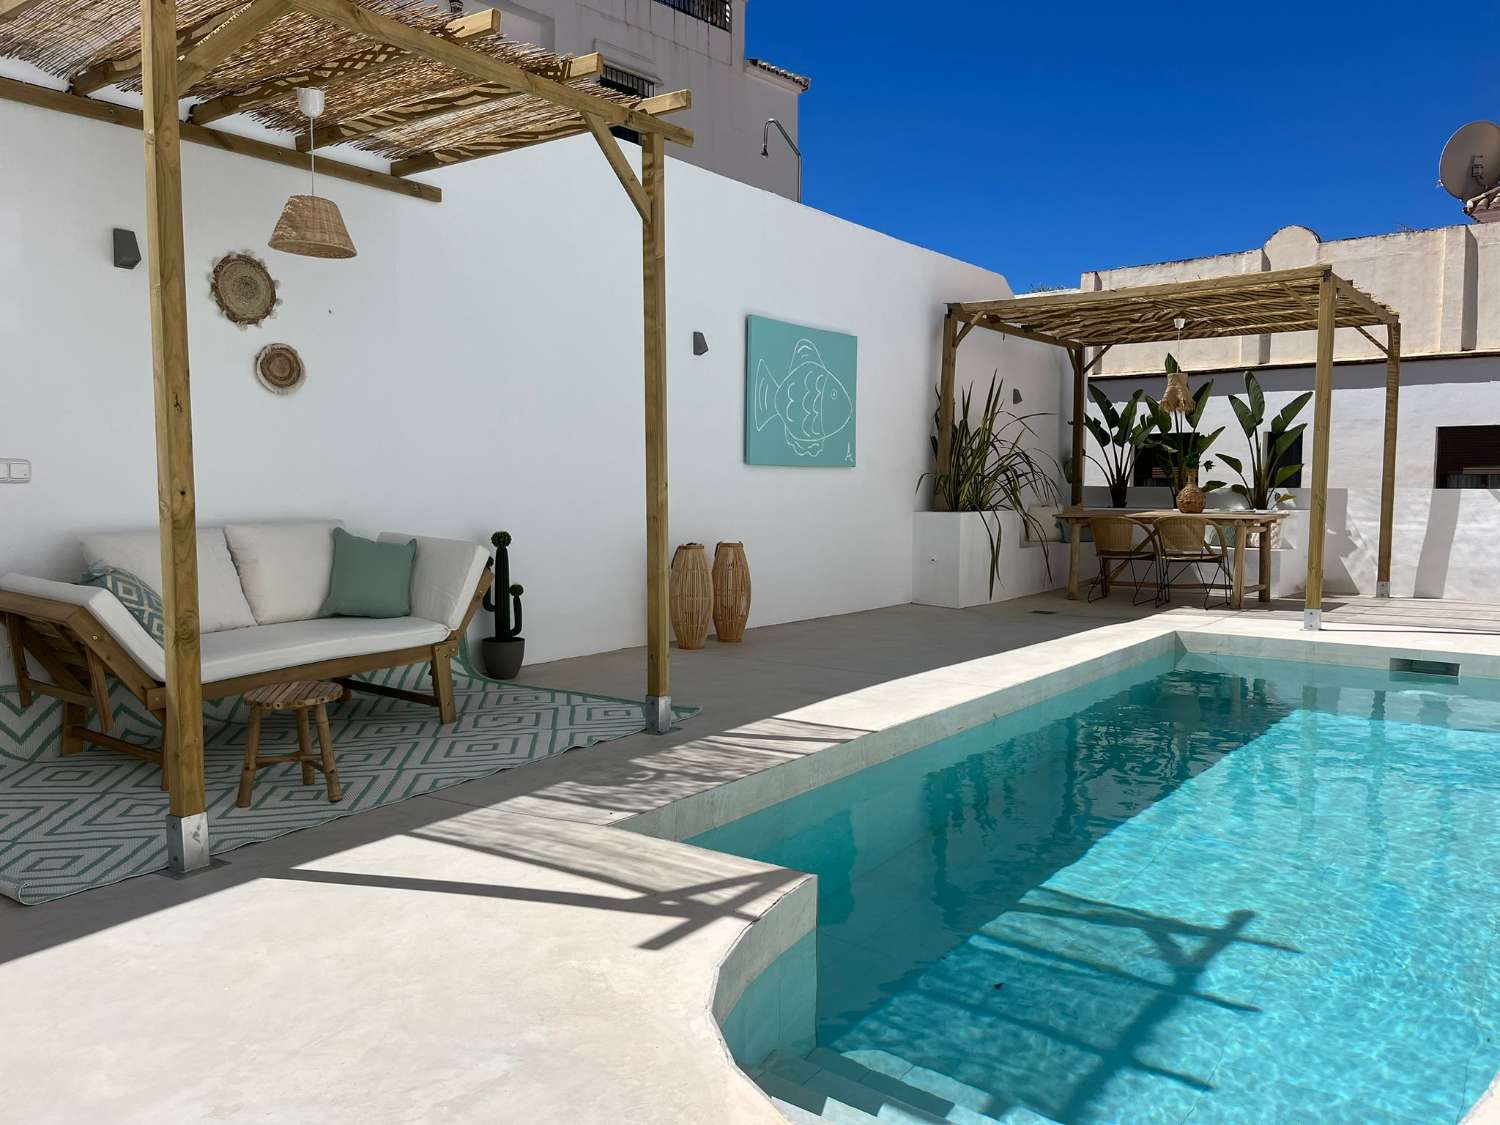 Fully renovated apartment with private pool in Frigiliana.